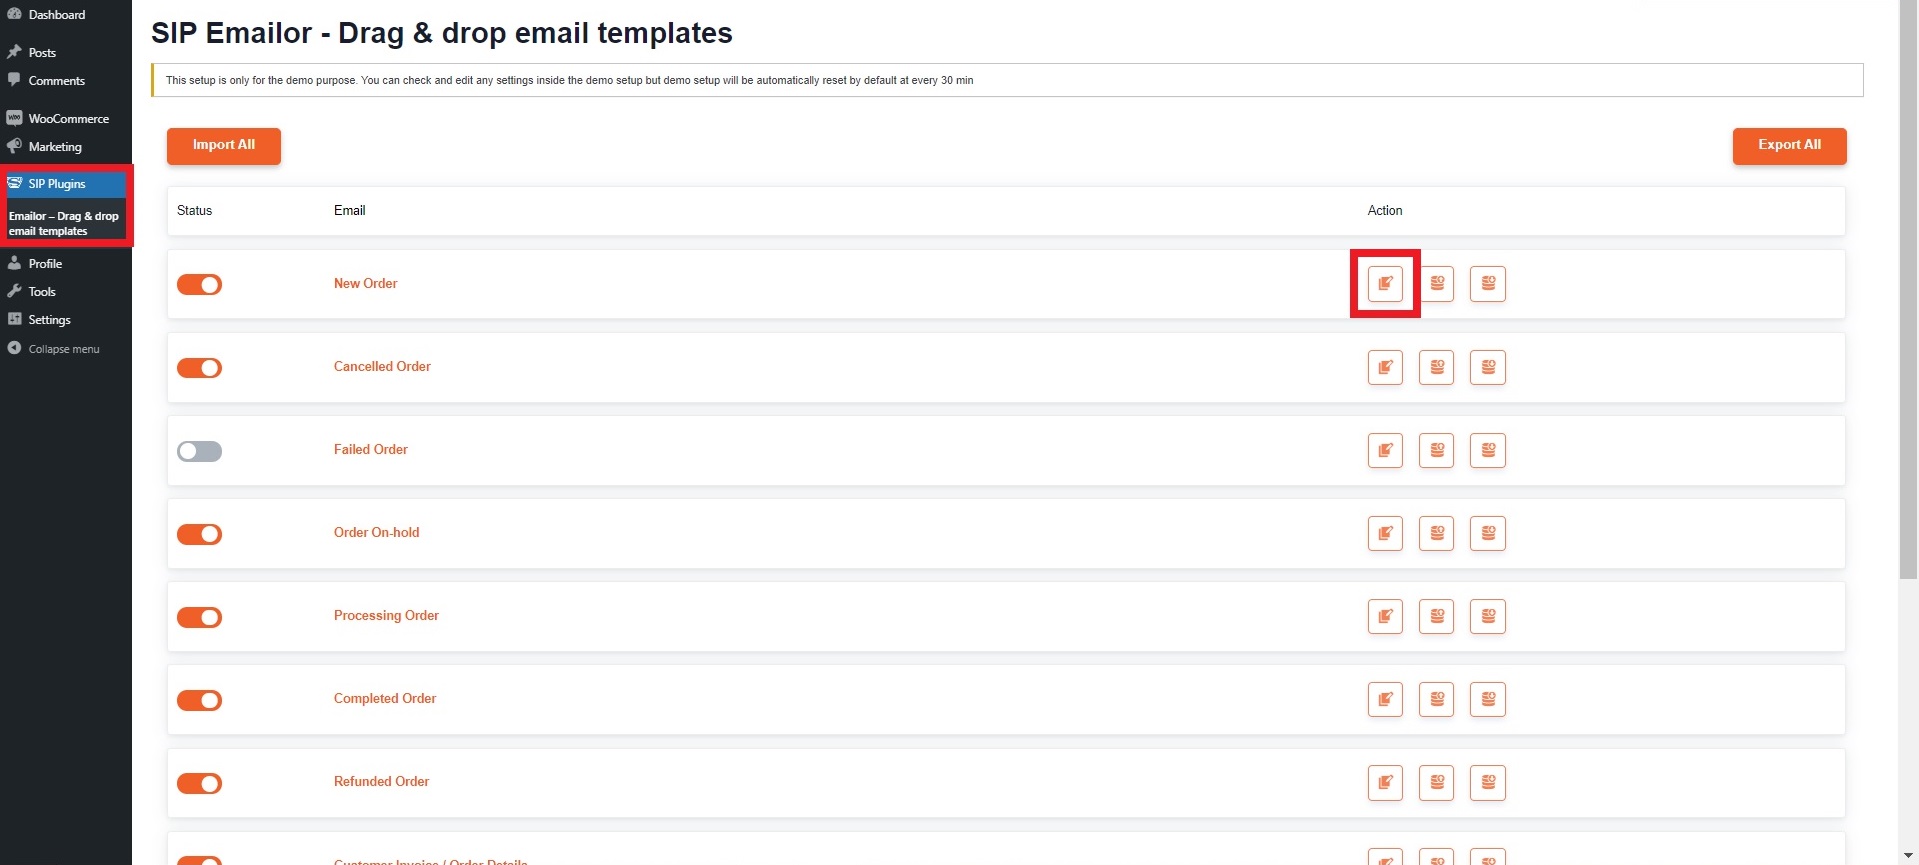 2. Click the Edit icon of the email template that you can to customize.